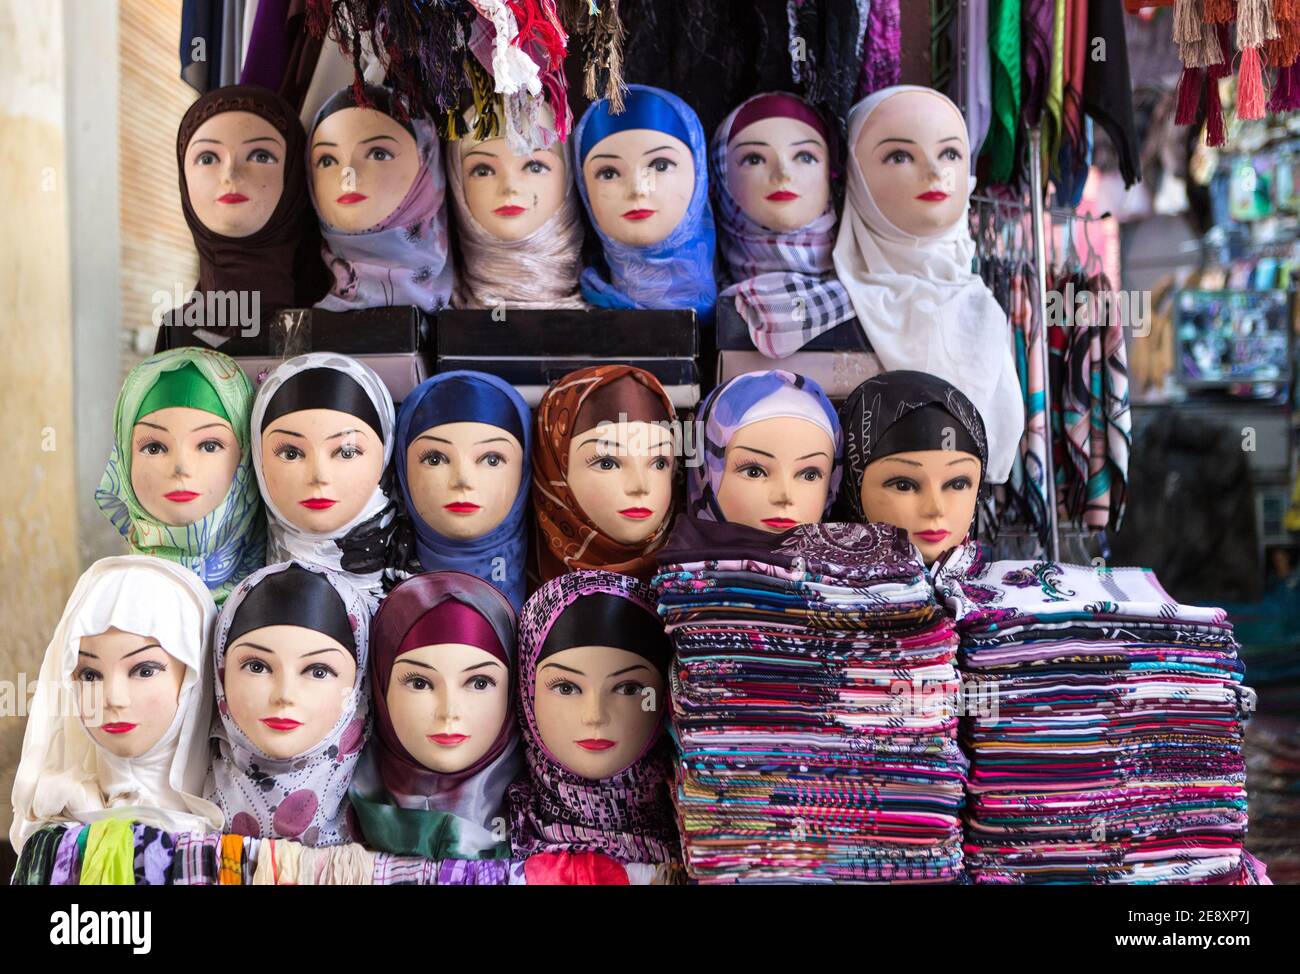 Mannequin of arab women wearing colorful fabric hijab on head in market in Morocco. Concept of travel, religion, islam, clothing, fashion, arab art, Stock Photo